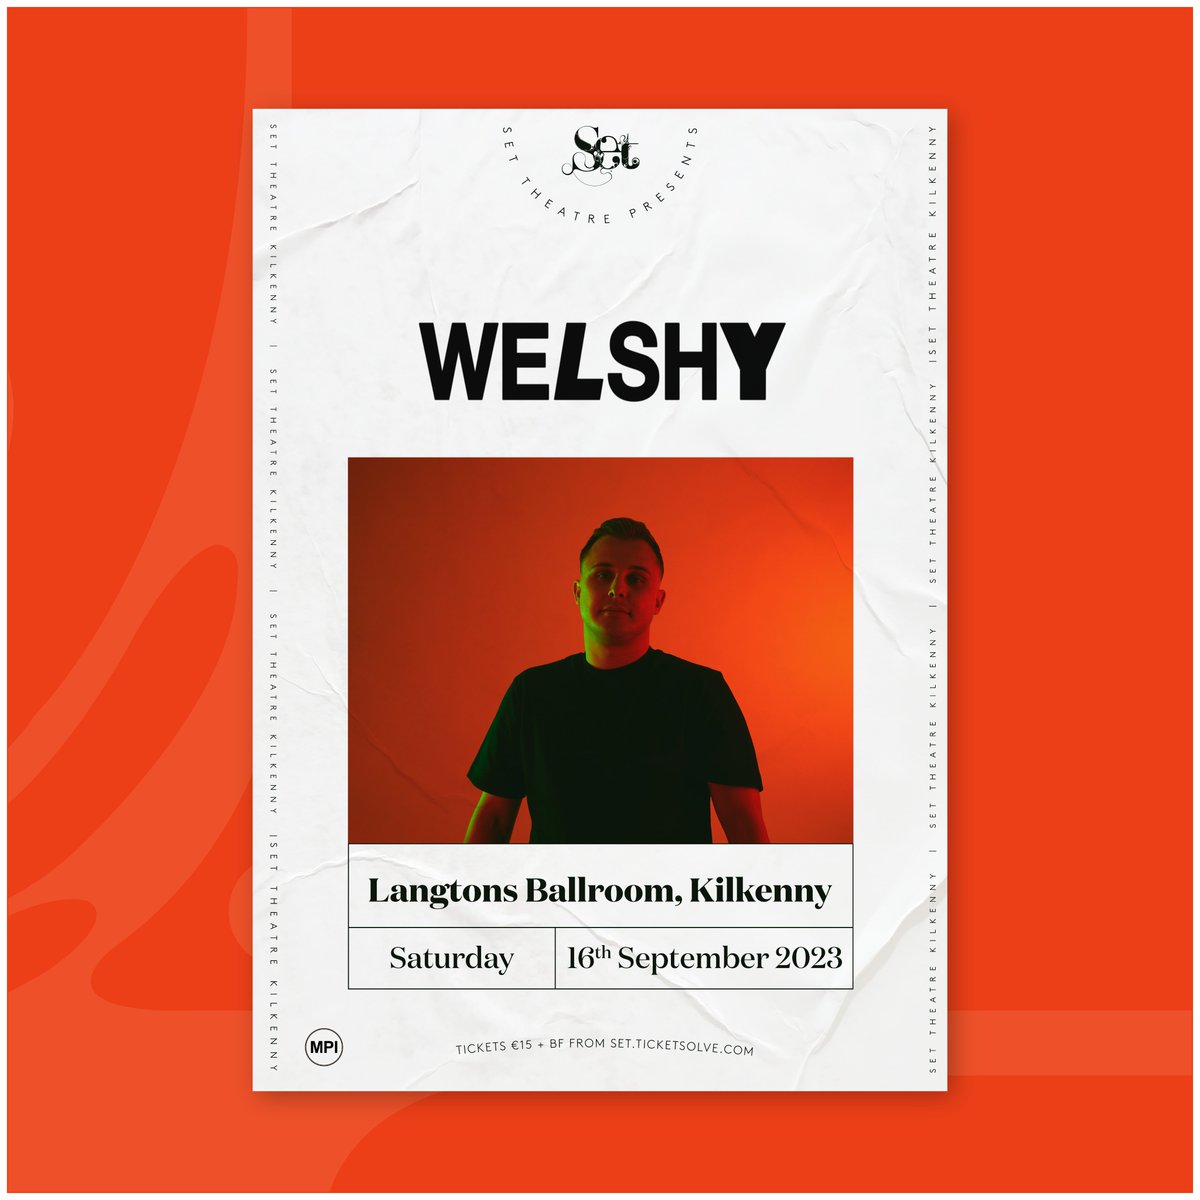 Hometown hero @welshyofficial is coming back to play a late night show in Langton's Ballroom on Saturday 16 September Tickets set.ticketsolve.com/shows/11736449…